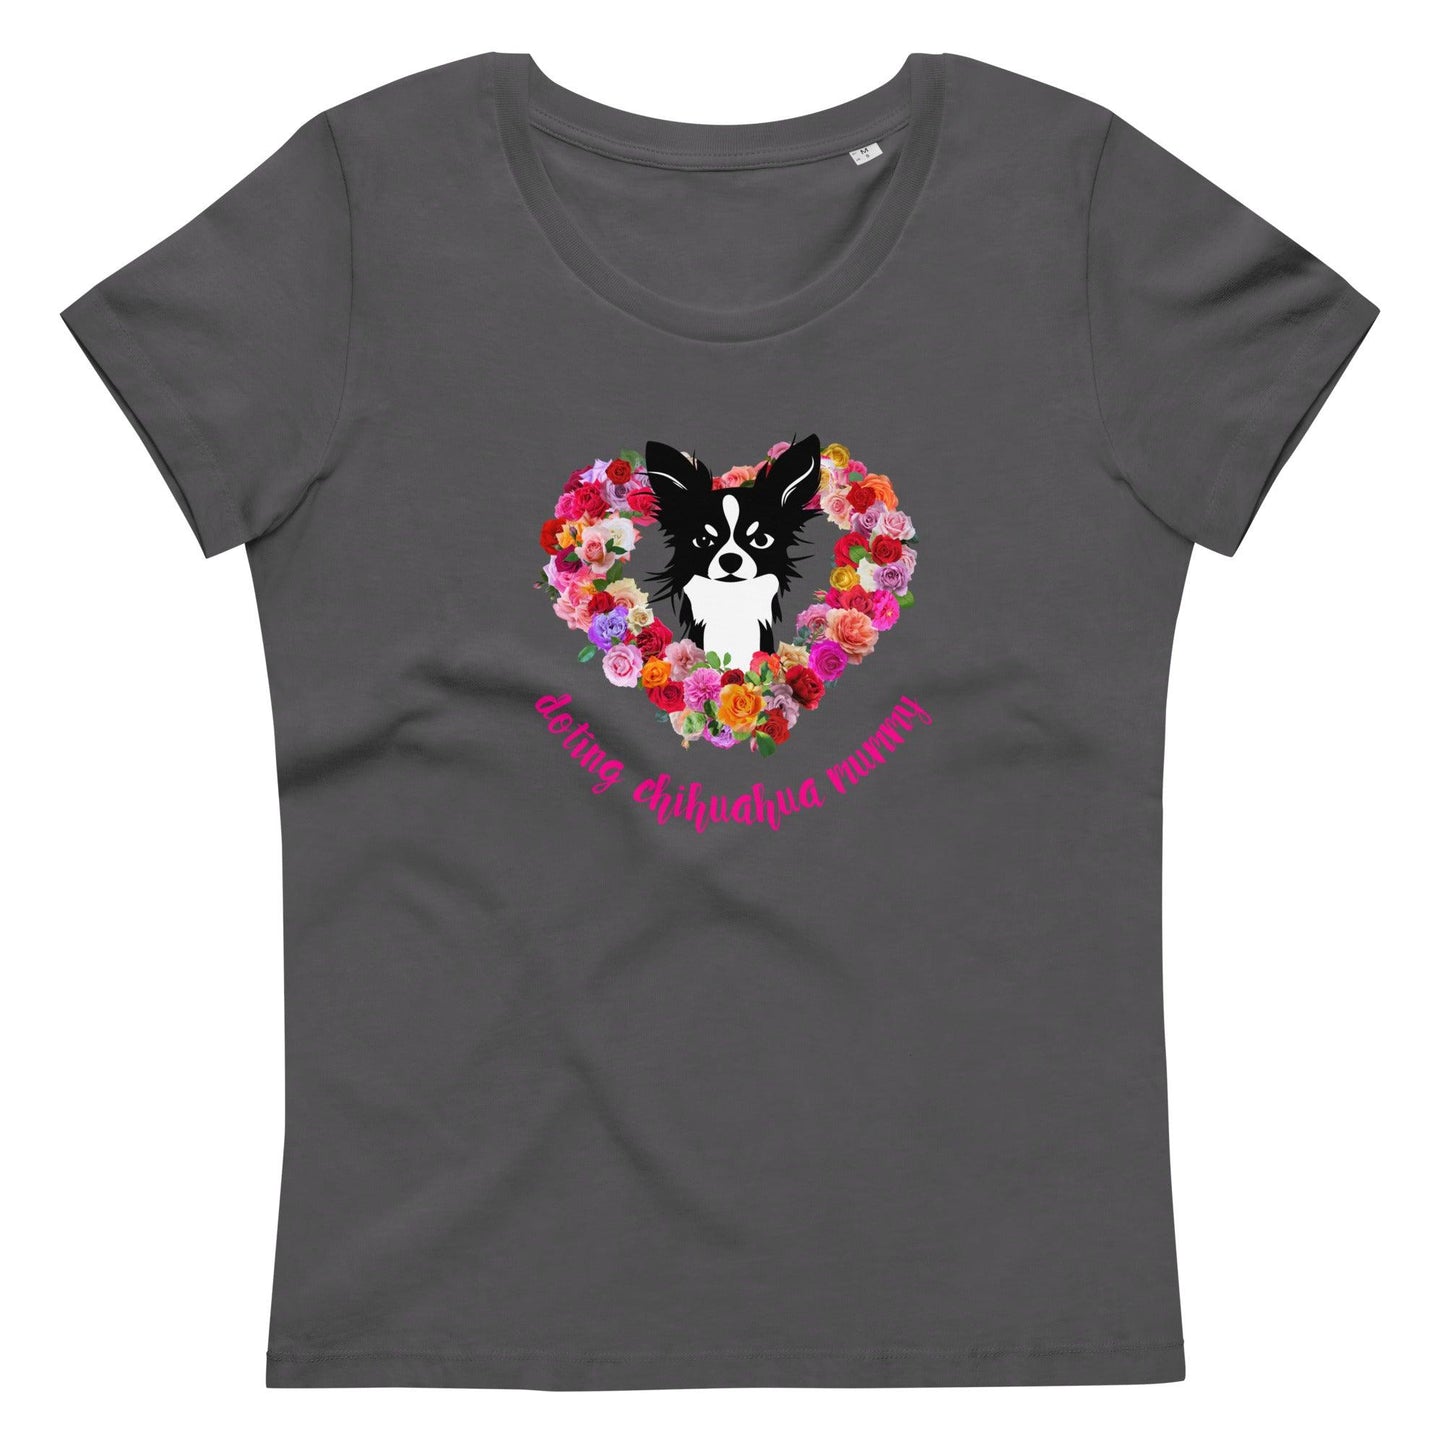 Dark grey 100% organic cotton women's fitted t-shirt. Chihuahua and a love heart of roses with the words "doting chihuahua mummy". S-2XL. Romantic, cute and perfect for Mother's Day. Design by Renate Kriegler for Chimigos.